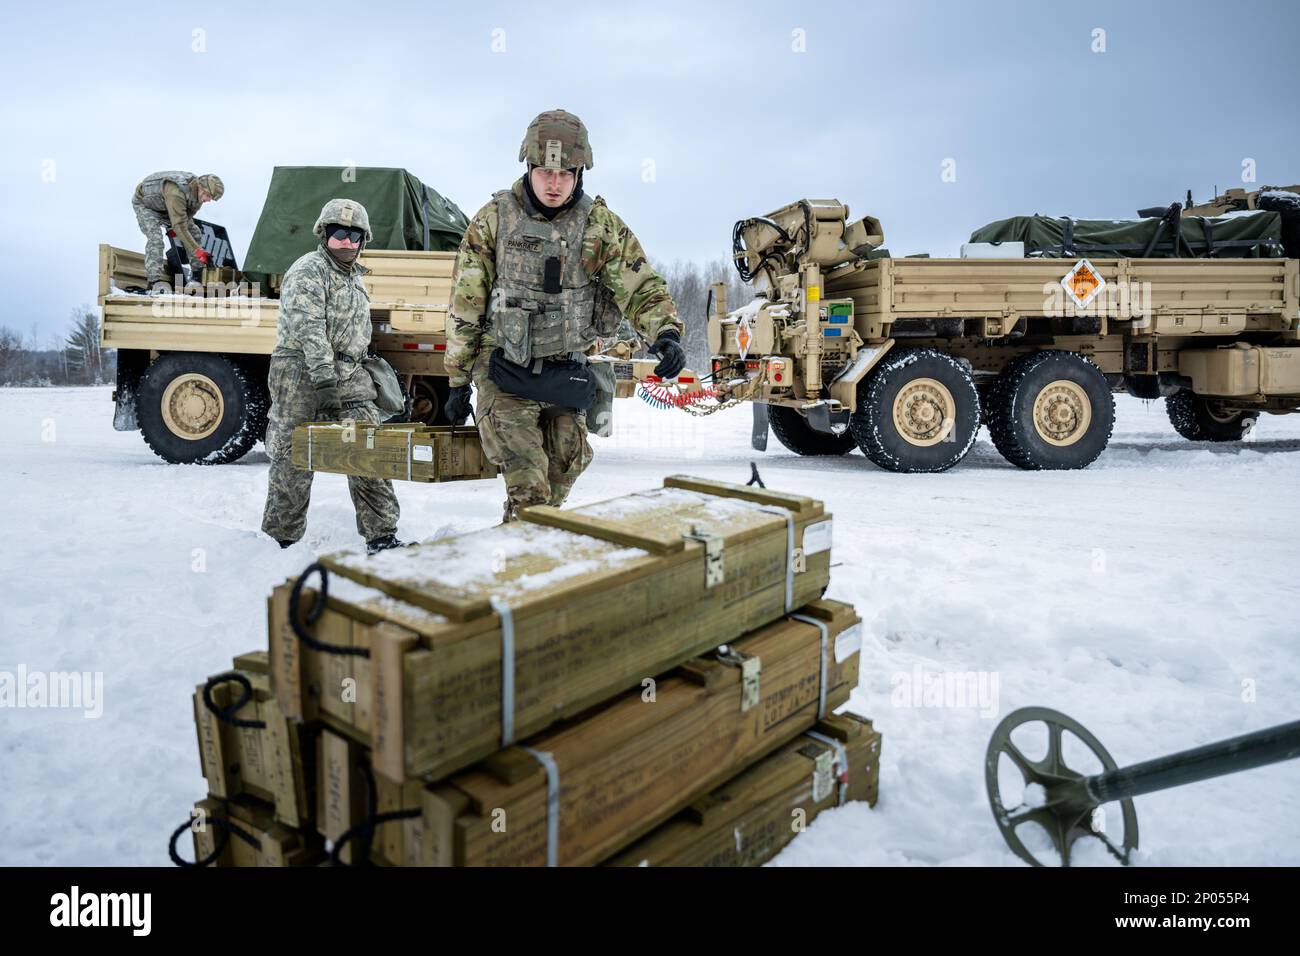 Army Sgt. Meranda Leisgana and Sgt. Trayton Pankratz, 1-120th Field Artillery Regiment, carries a wooden crate of 105mm High Explosive shells for the M119 howitzer during Northern Strike 23-1, Jan. 25, 2023, at Camp Grayling, Mich. Units that participate in Northern Strike’s winter iteration build readiness by conducting joint, cold-weather training designed to meet objectives of the Department of Defense’s Arctic Strategy. Stock Photo